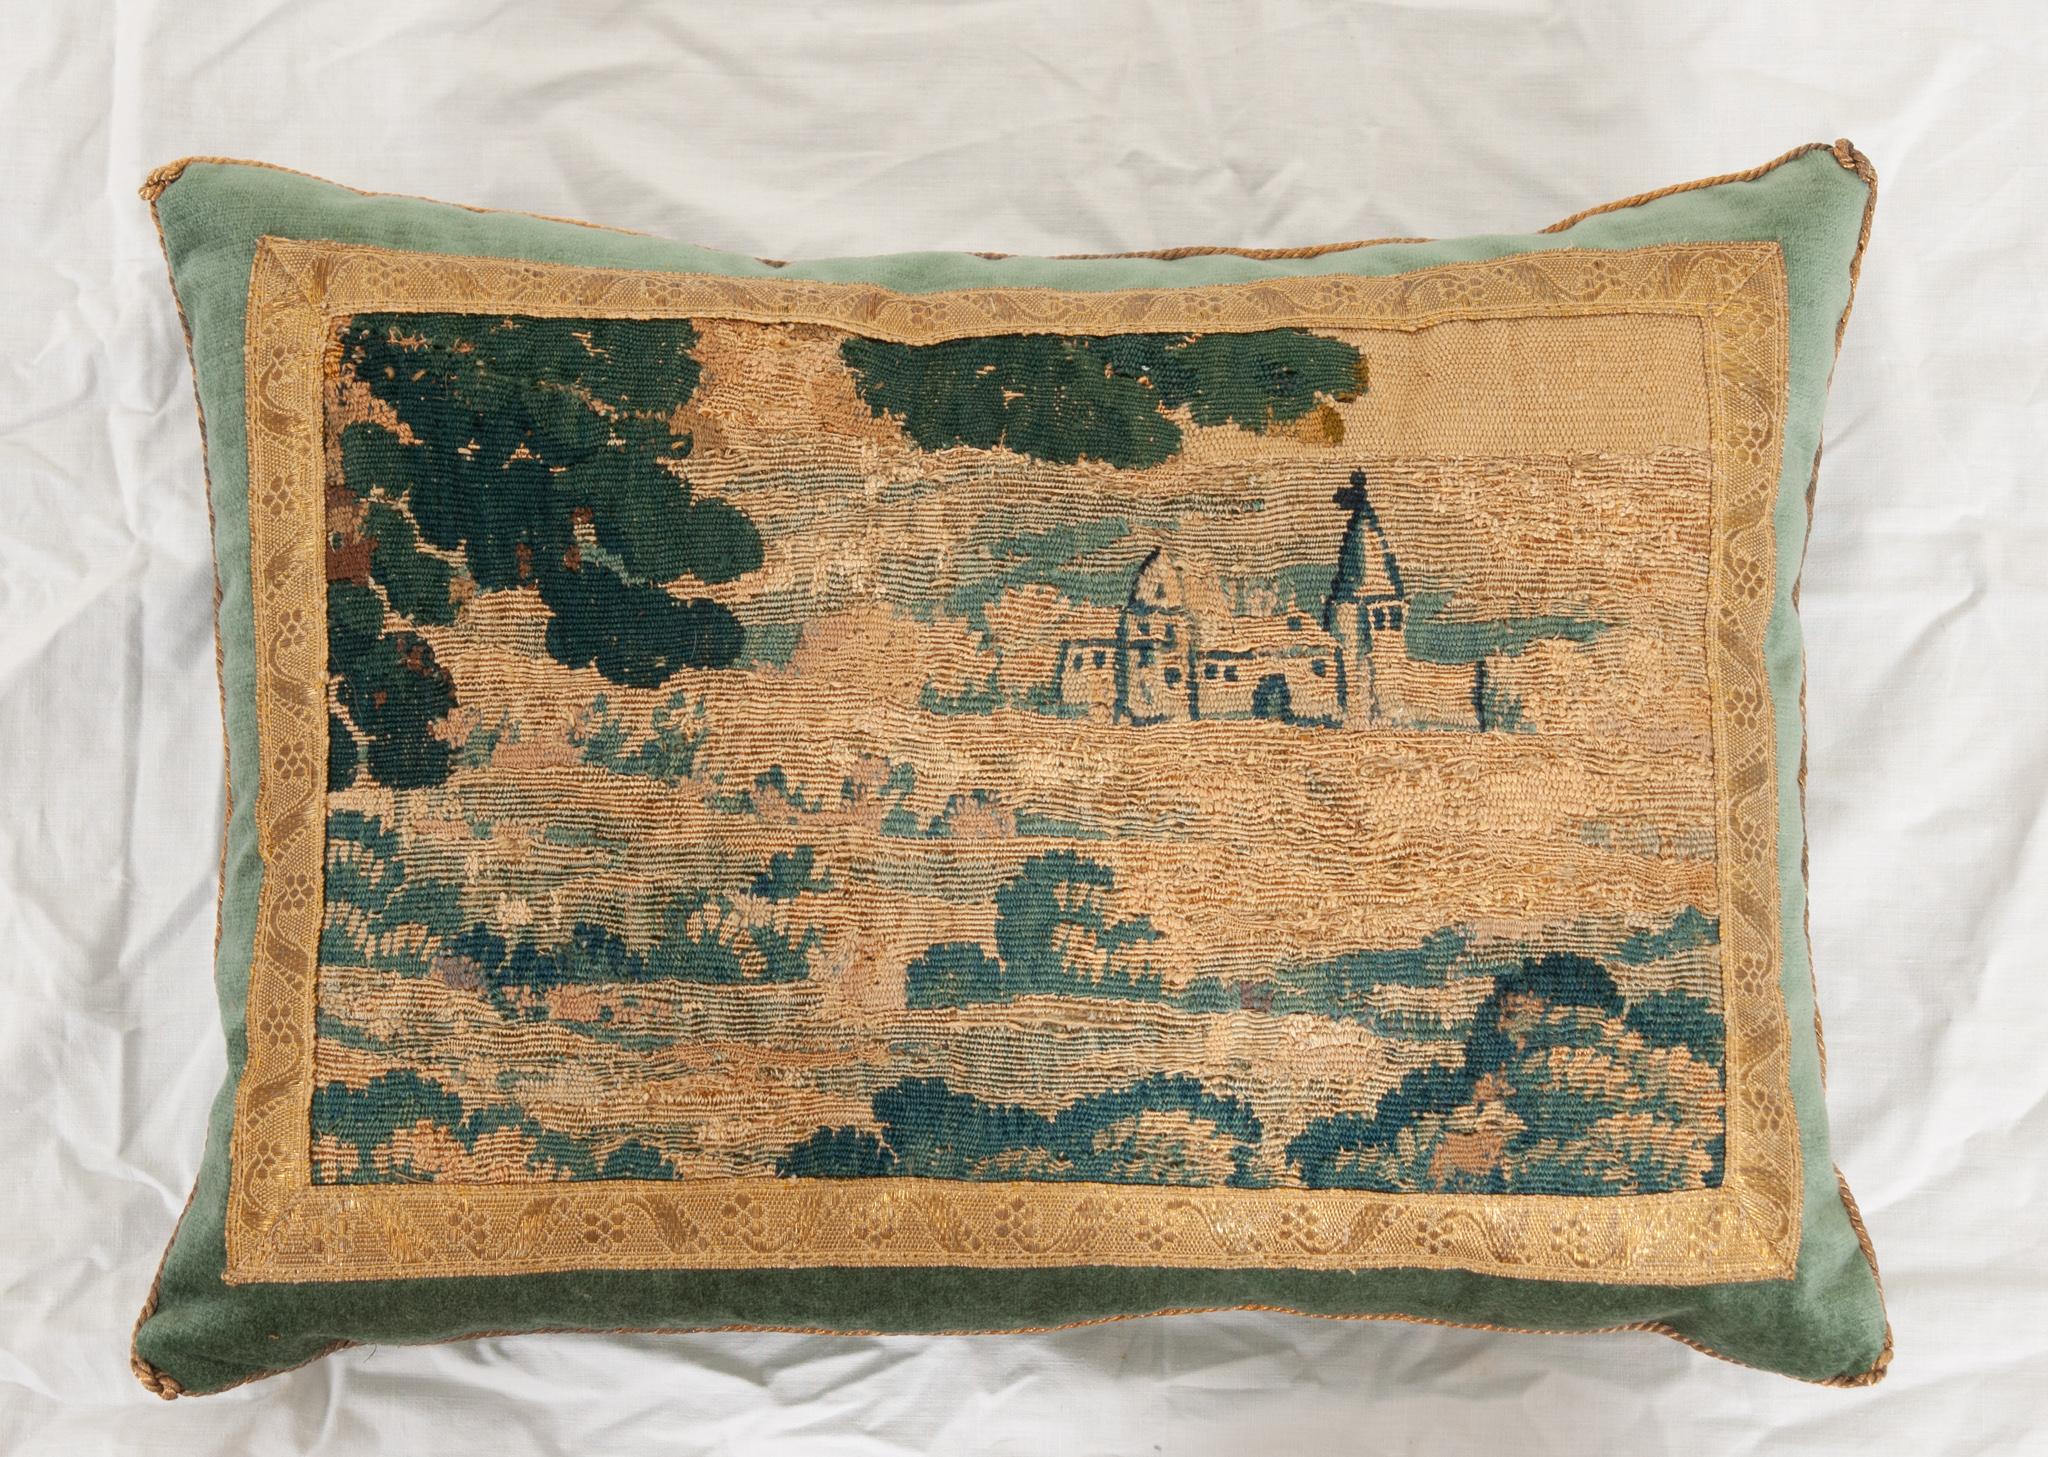 Late 17th to early 18th century Flemish needlepoint tapestry fragment depicting a countryside estate in shades of green, blue, and gold. Framed with antique gold metallic galon with a floral motif on stunning blue velvet. Vintage gold metallic